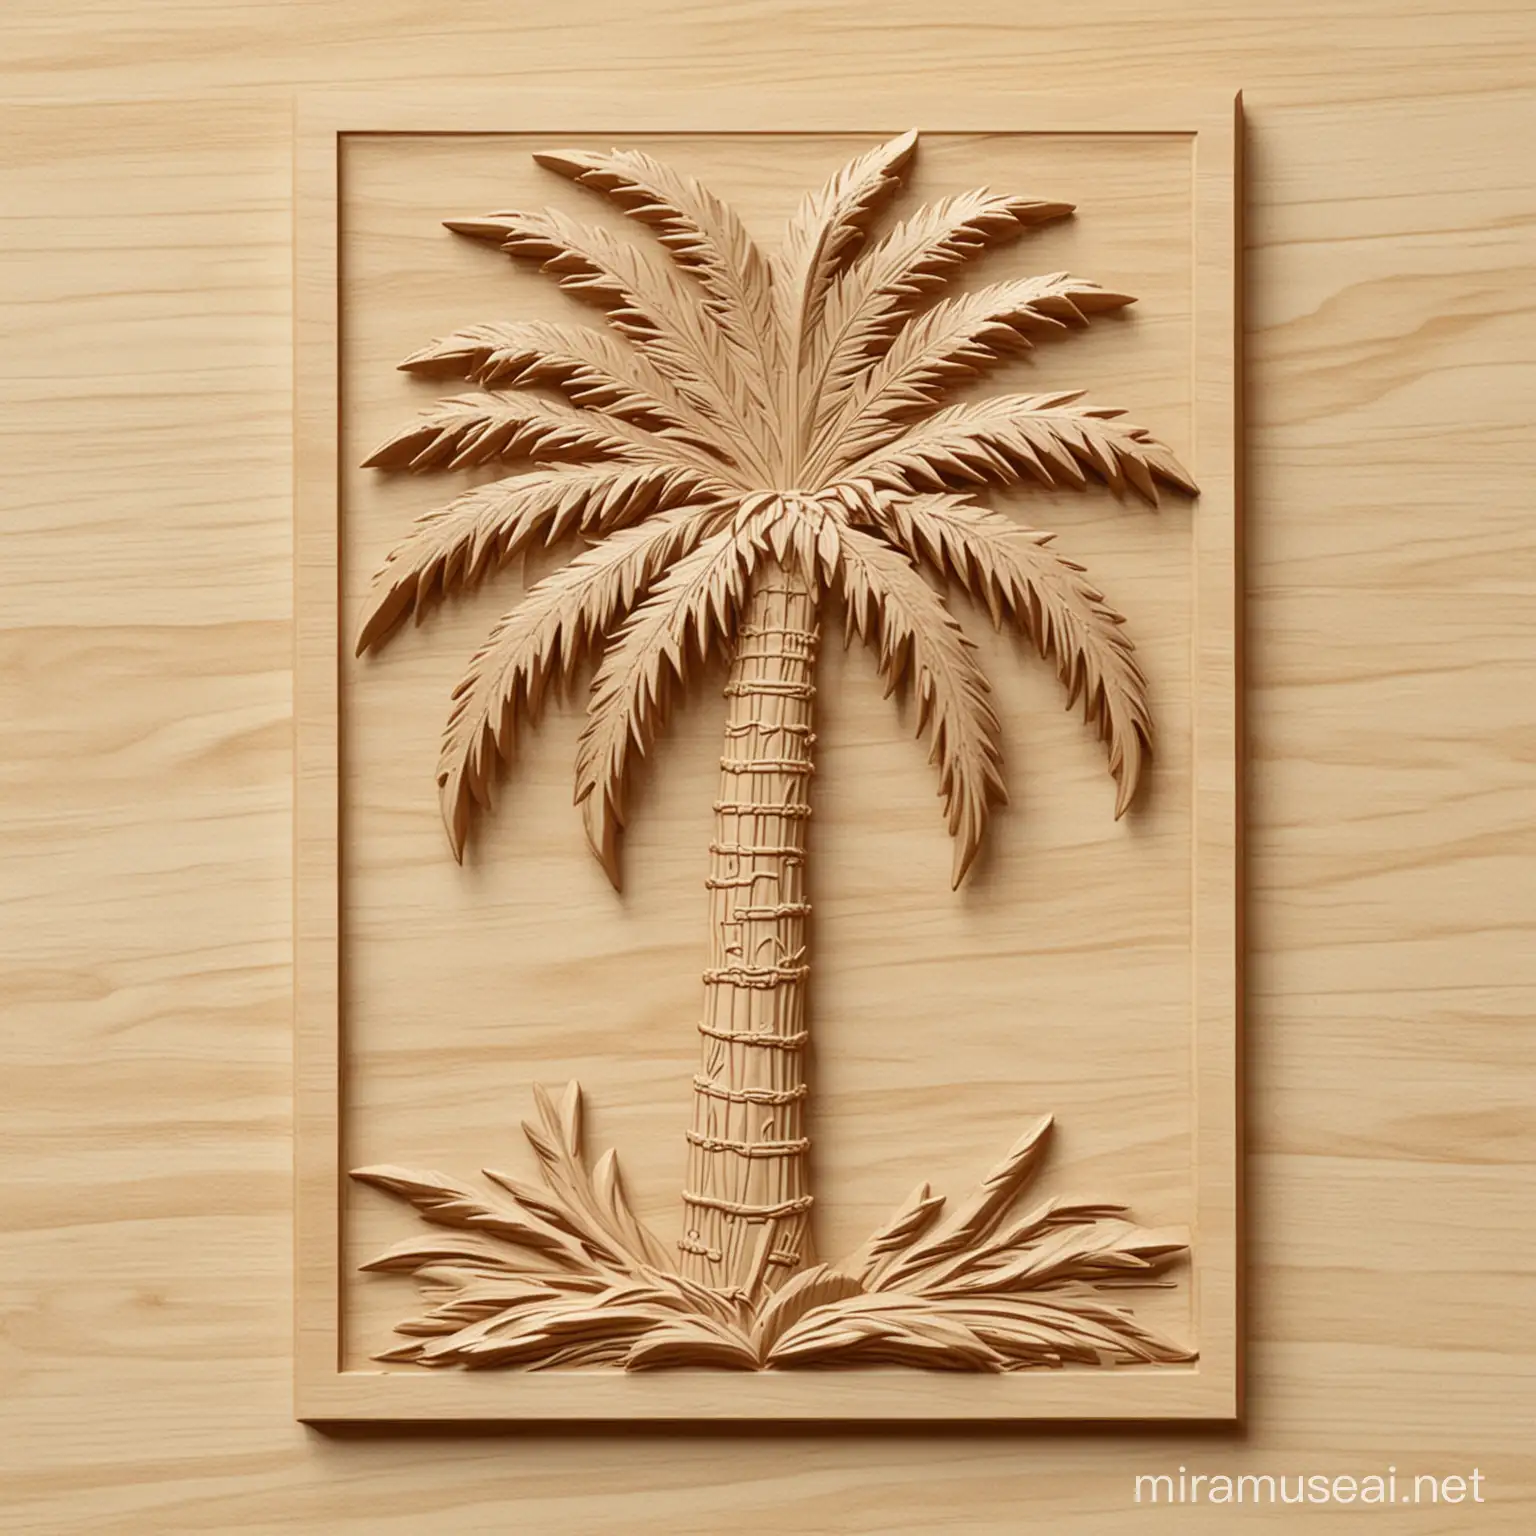 Tropical Palm Tree CNC Carving STL Model for Woodworking Projects